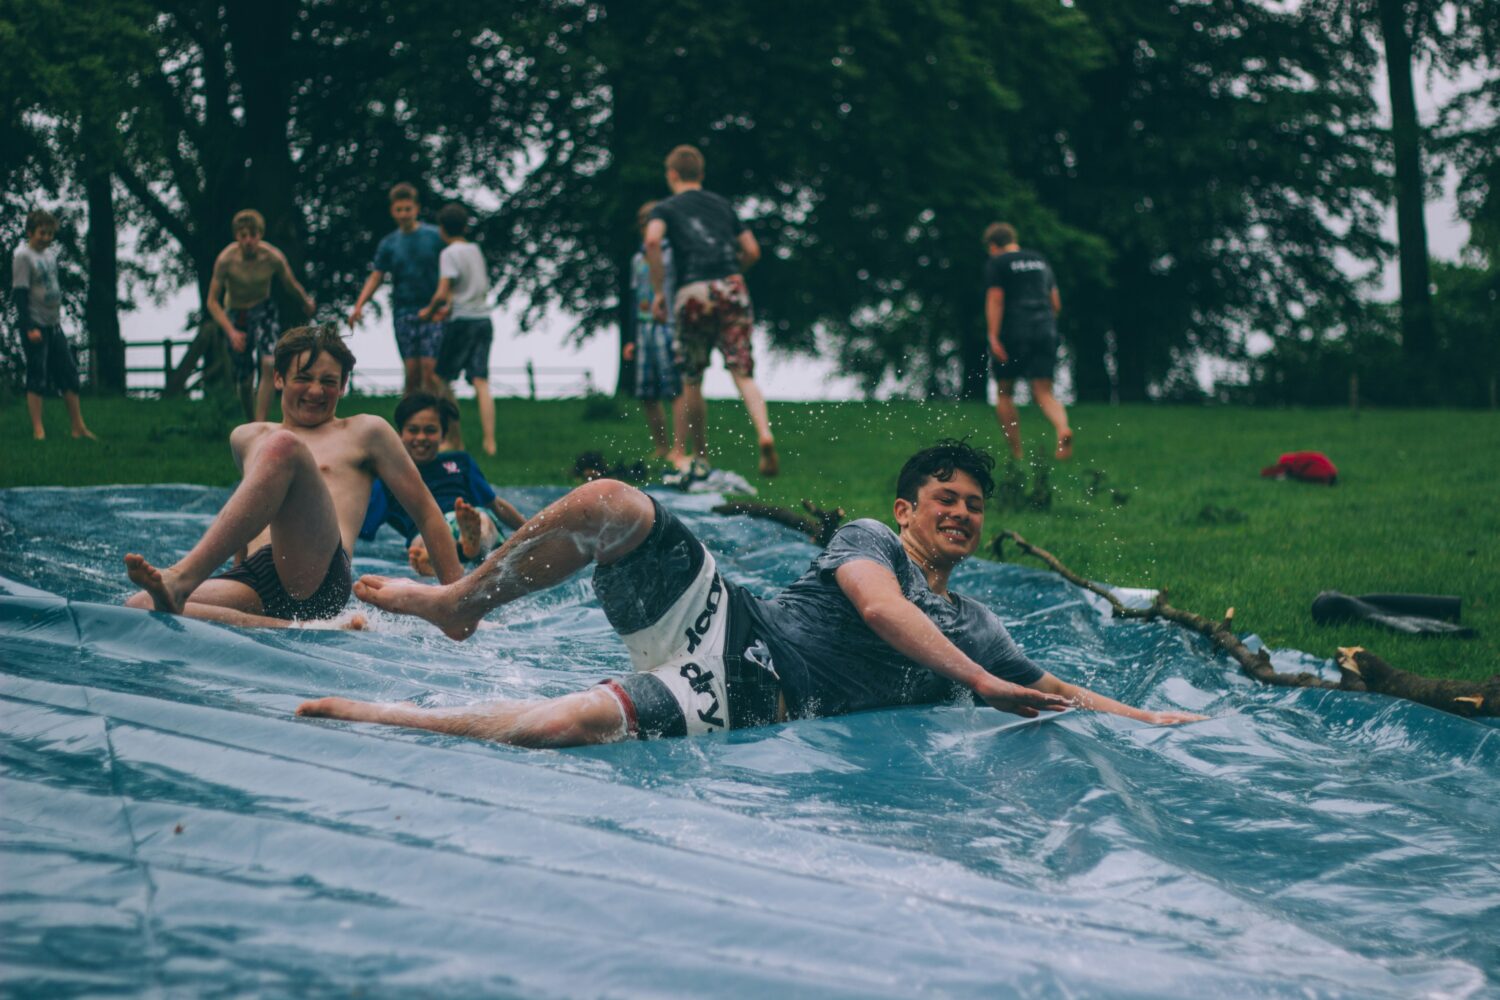 Students on a water slide